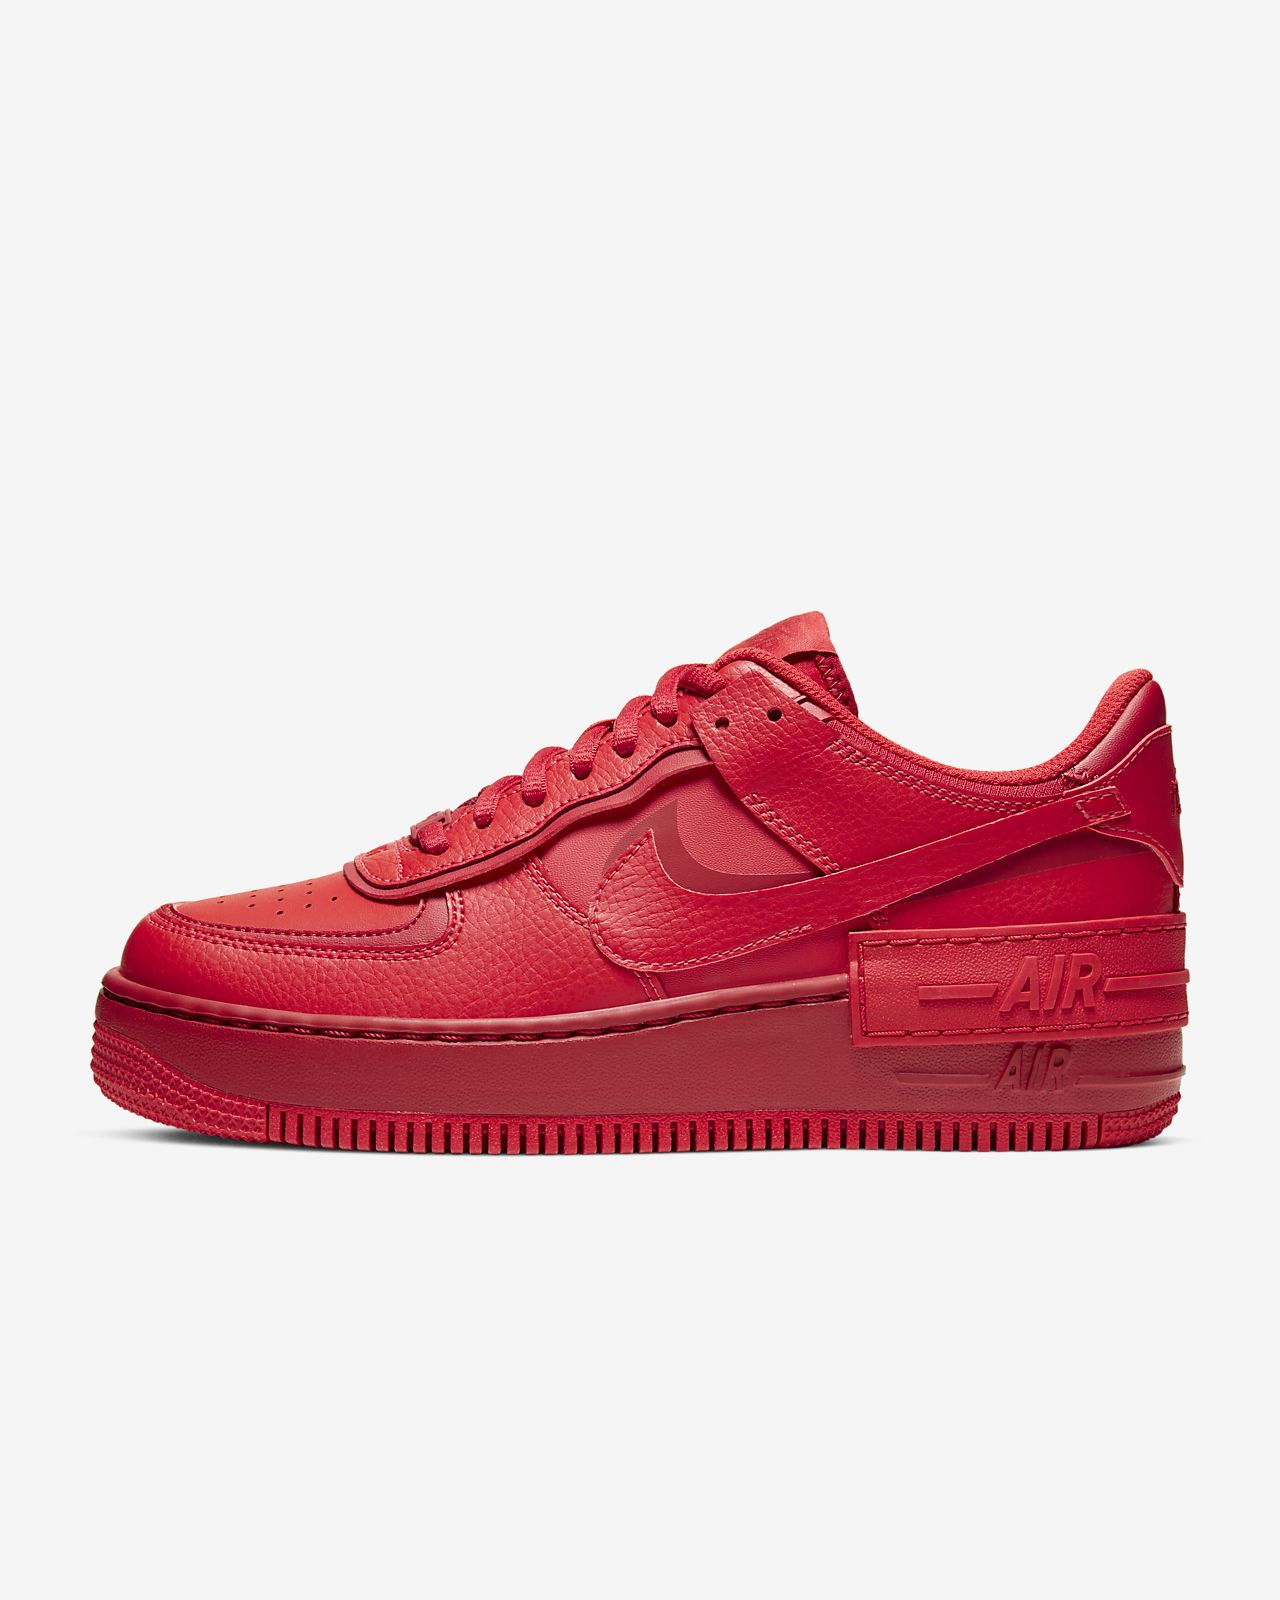 NIKE Official]Nike Air Force 1 Shadow 